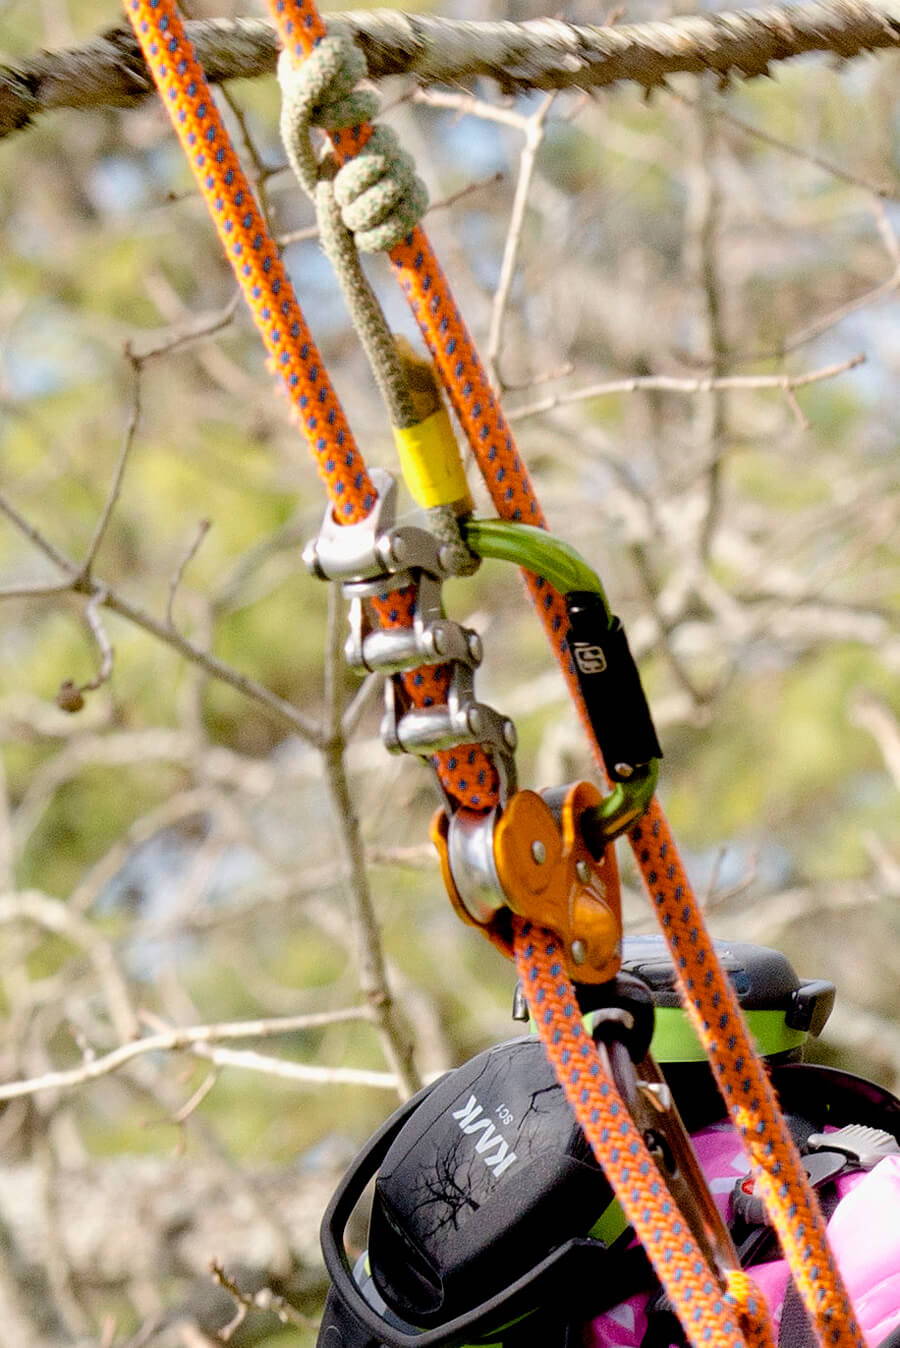 The Petzl ZigZag in a climbing set-up